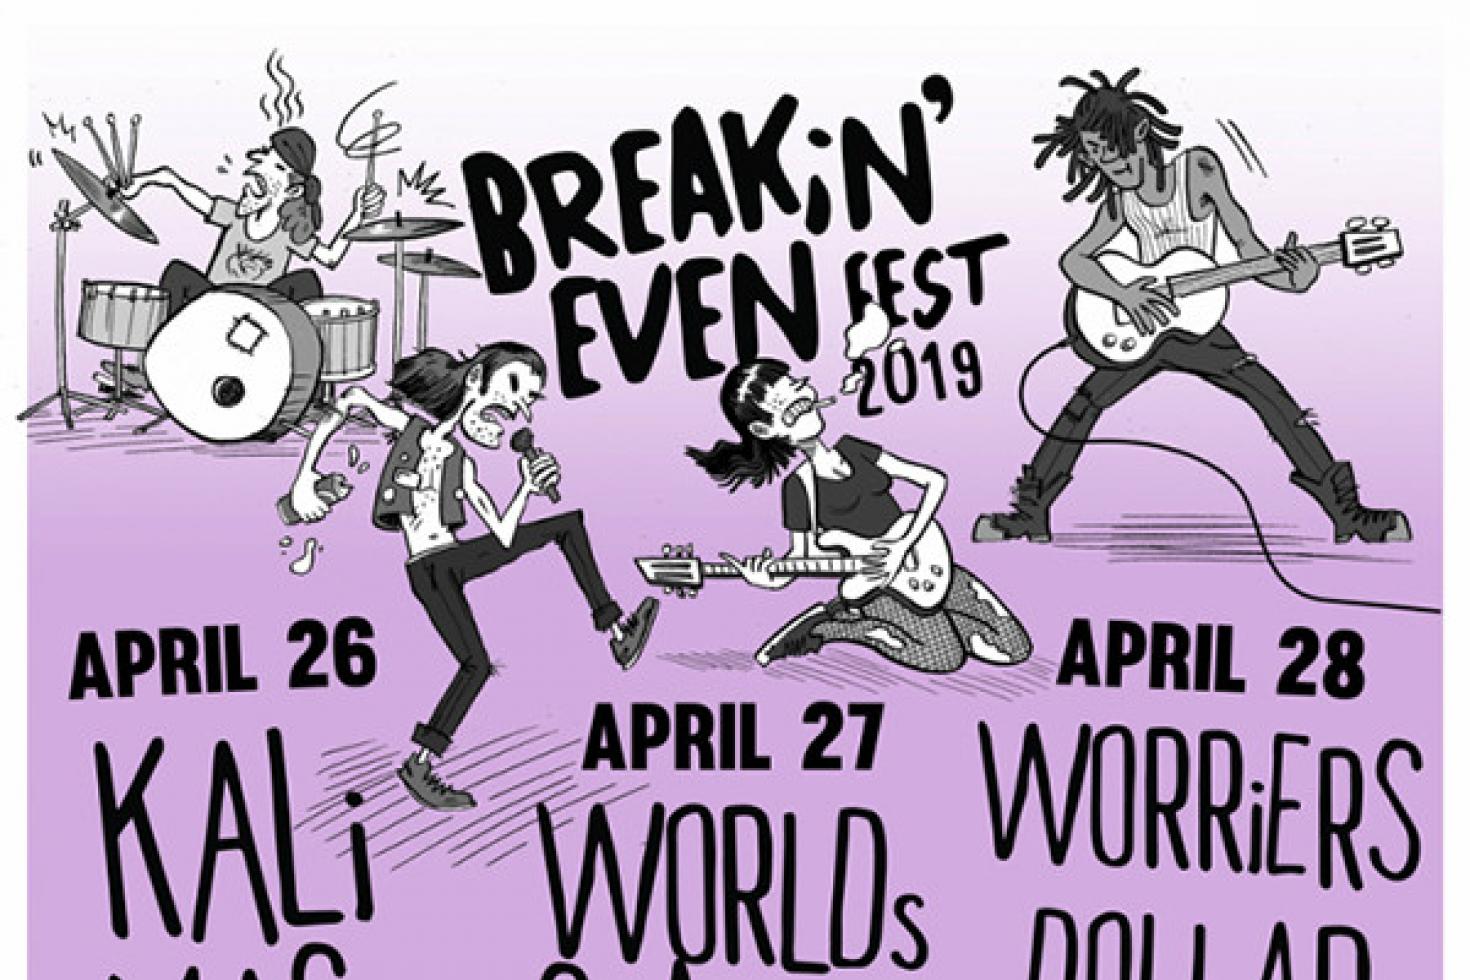 Check out the promo video on Breakin’ Even Fest